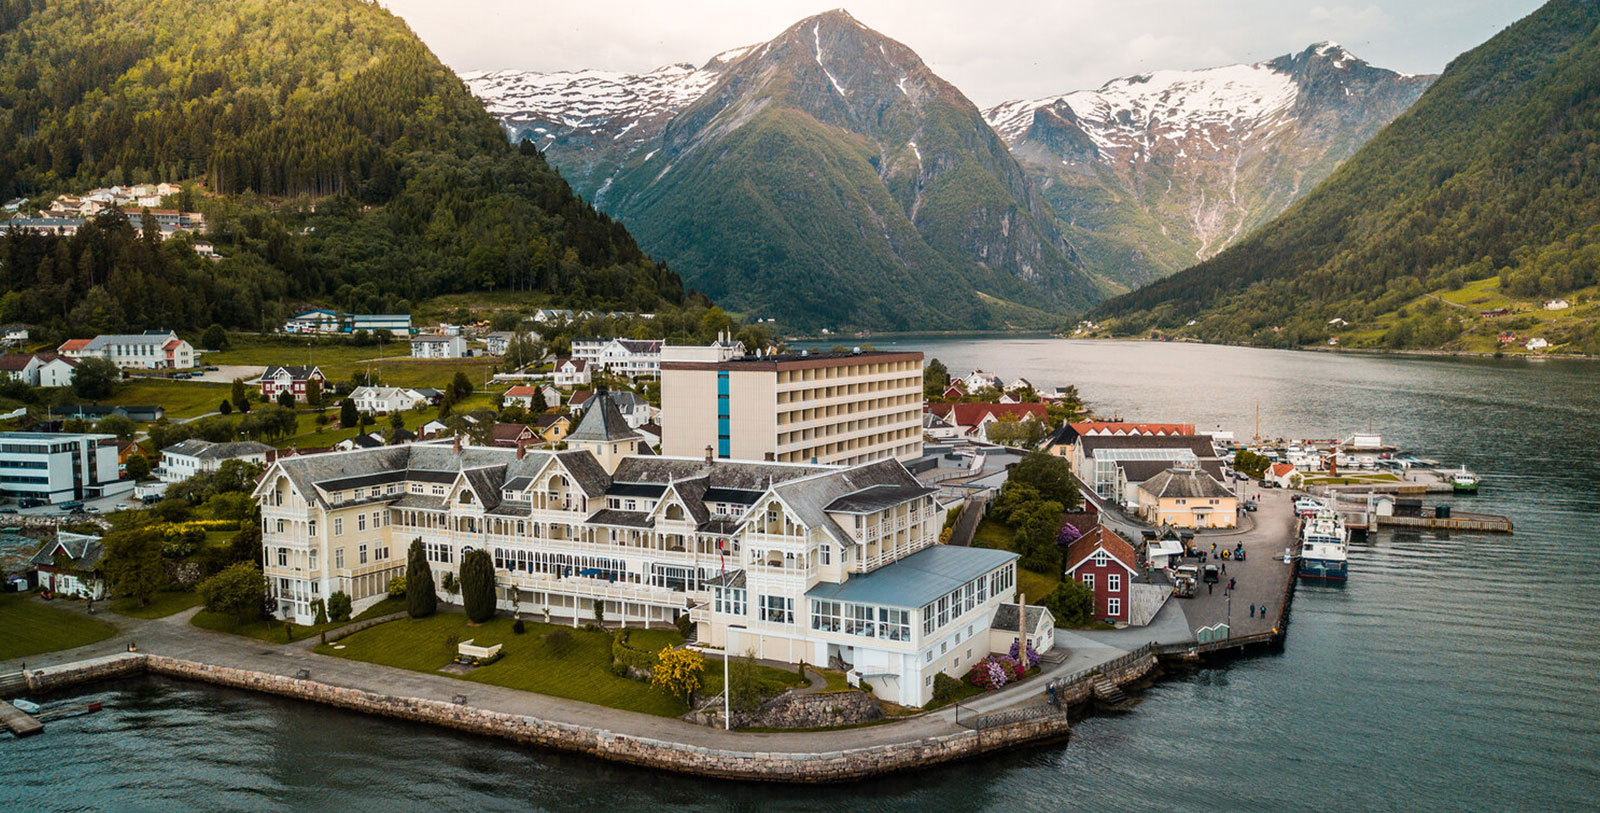 Image of Hotel Exterior with Historic Car Kviknes Hotel, 1752, Member of Historic Hotels Worldwide, in Balestrand, Norway, Special Offers, Discounted Rates, Families, Romantic Escape, Honeymoons, Anniversaries, Reunions